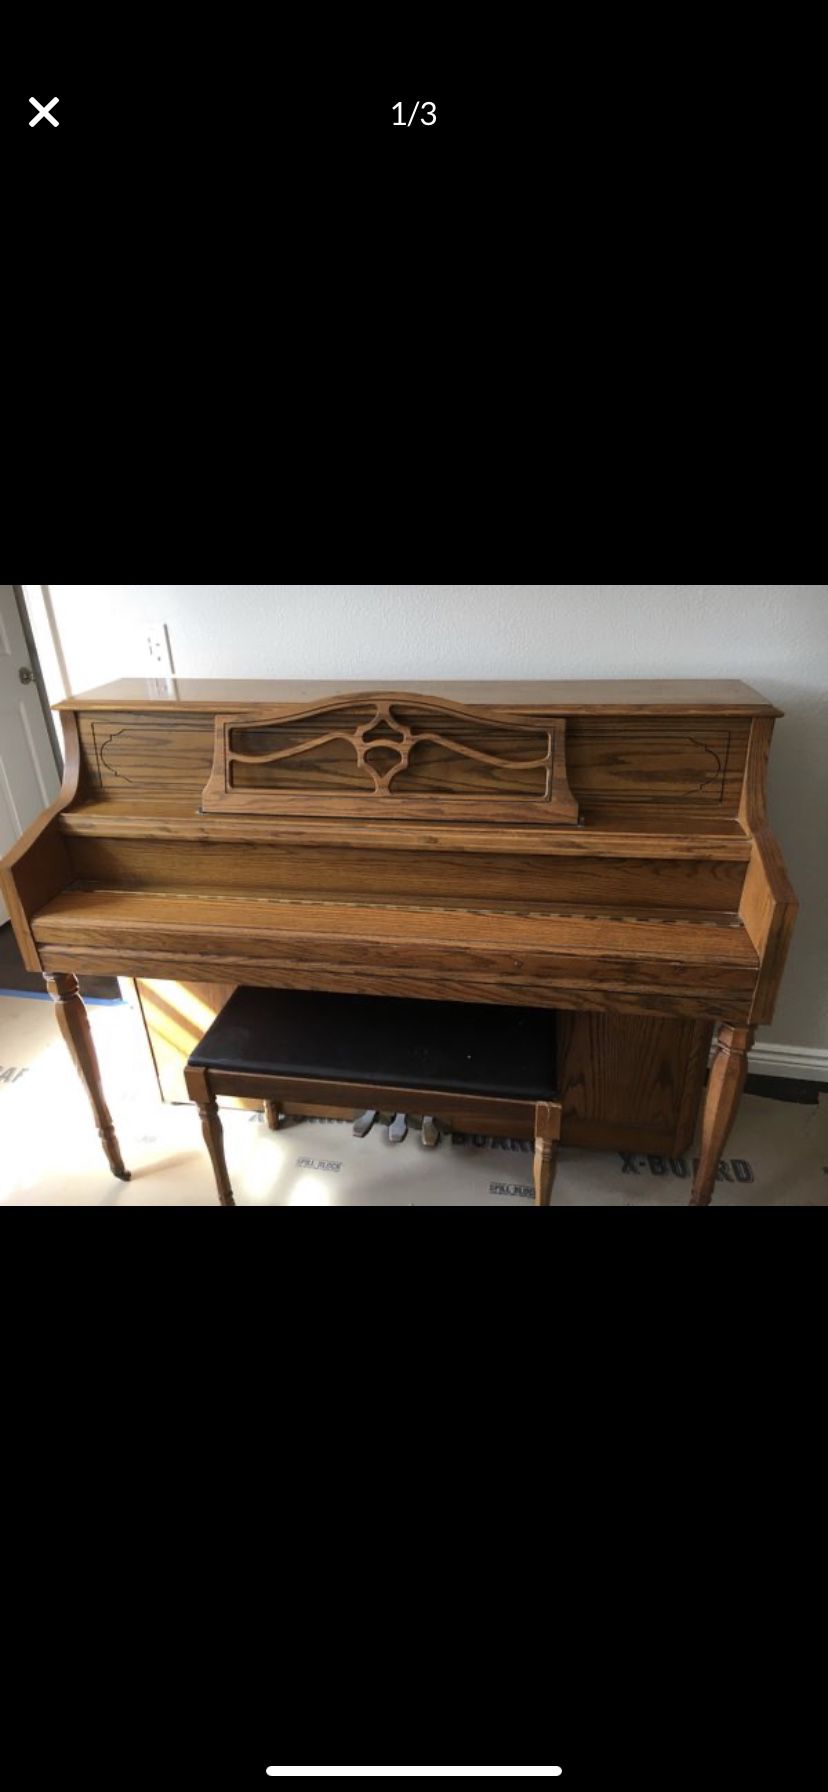 Antique Schafer and Sons upright Piano in great condition just needs to be tuned.